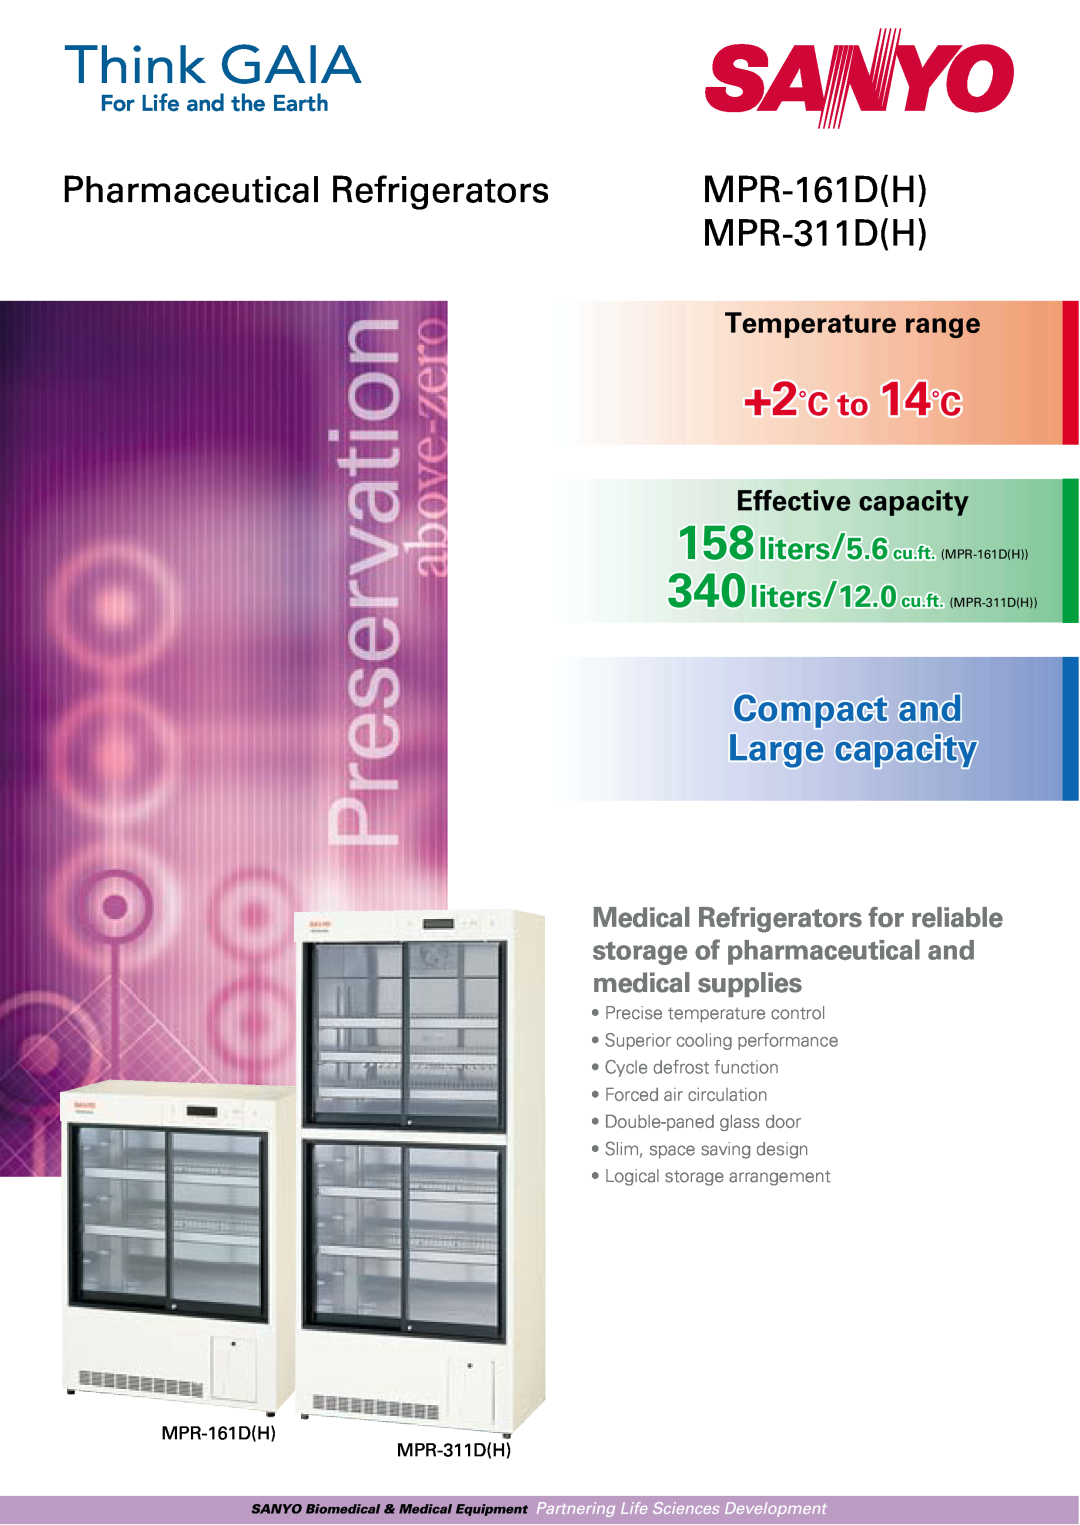 Sanyo MPR-161D(H) manual Pharmaceutical Refrigerators, MPR-161DH, MPR-311DH, Compact and Large capacity, +2˚C to 14˚C 